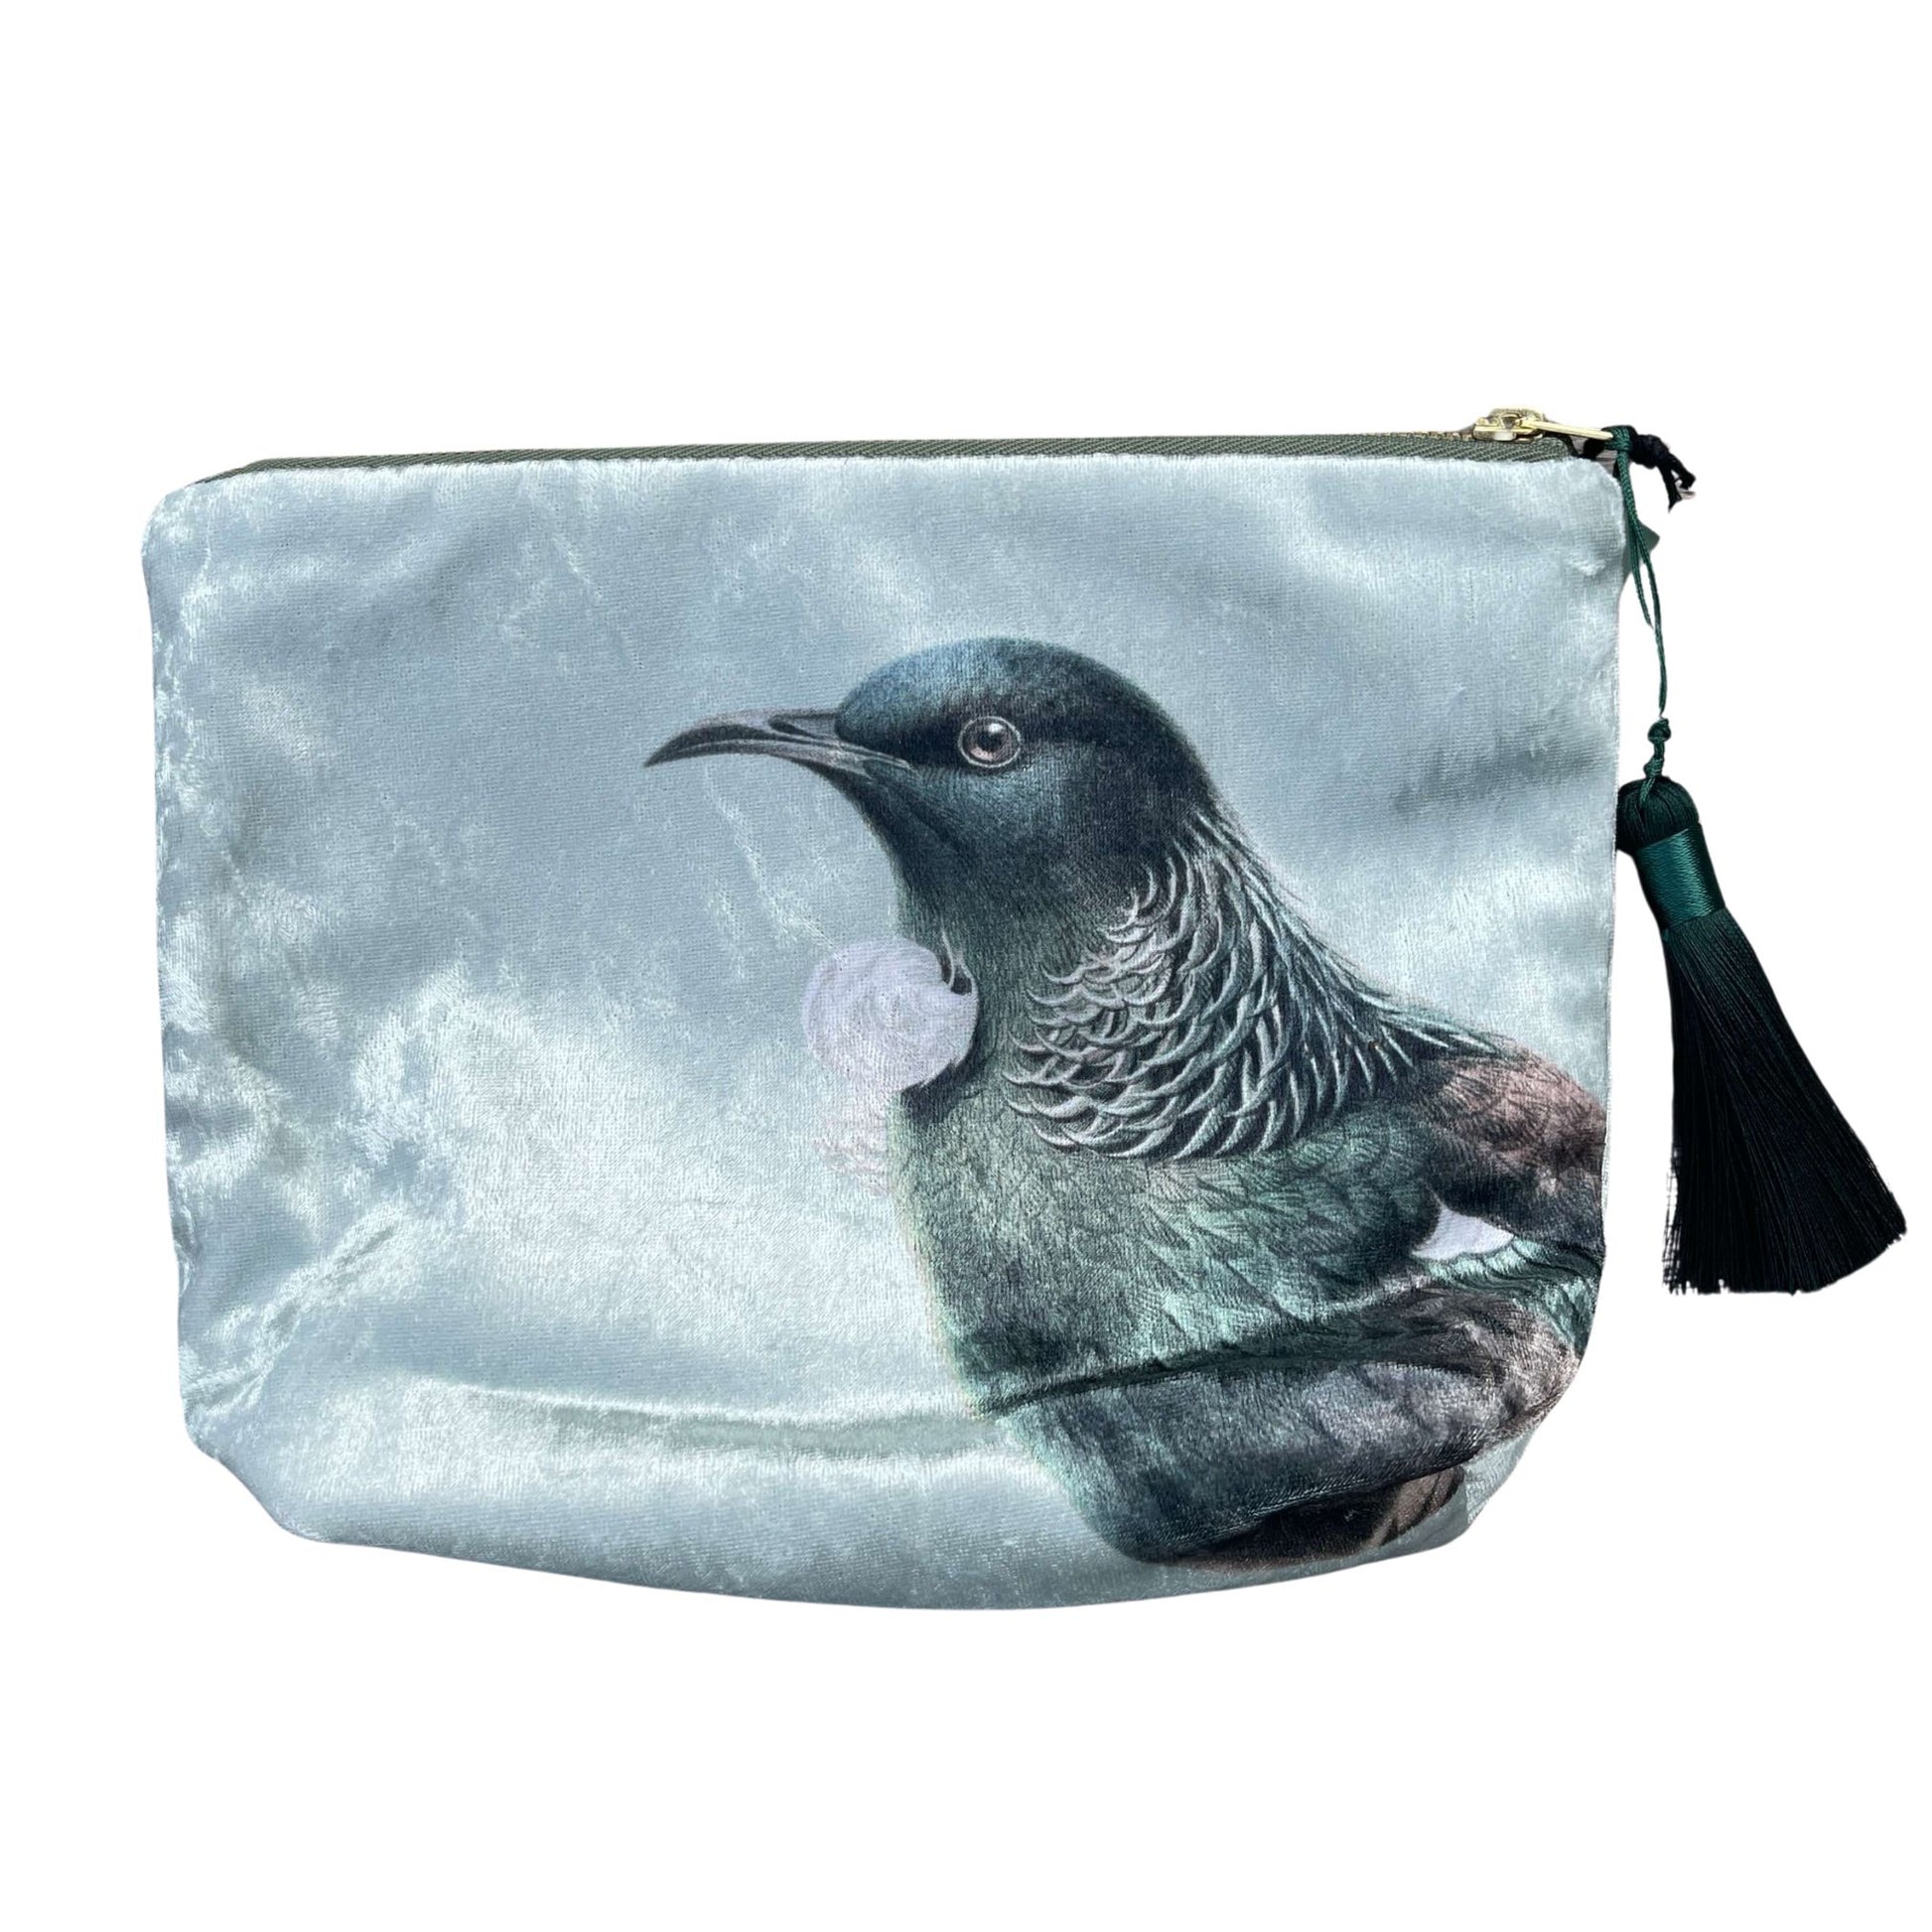 Velvet cosmetic bag featuring the head of a Tui bird.